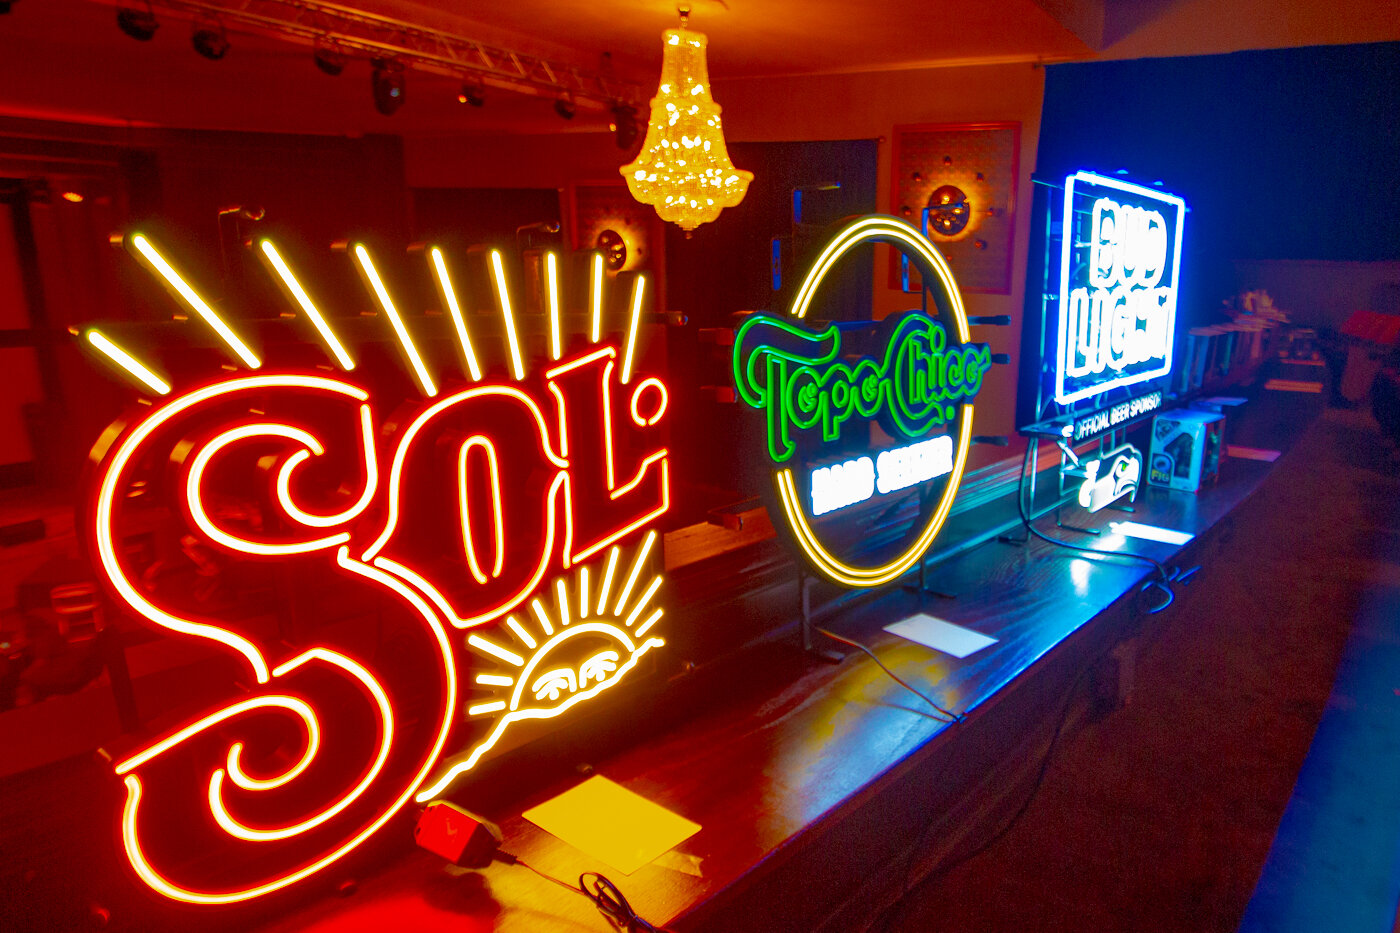 Neon signs were among the many silent auction items up for bid Saturday night at the Justin Ames benefit held to raise money for Ames' daughters after his death last month.